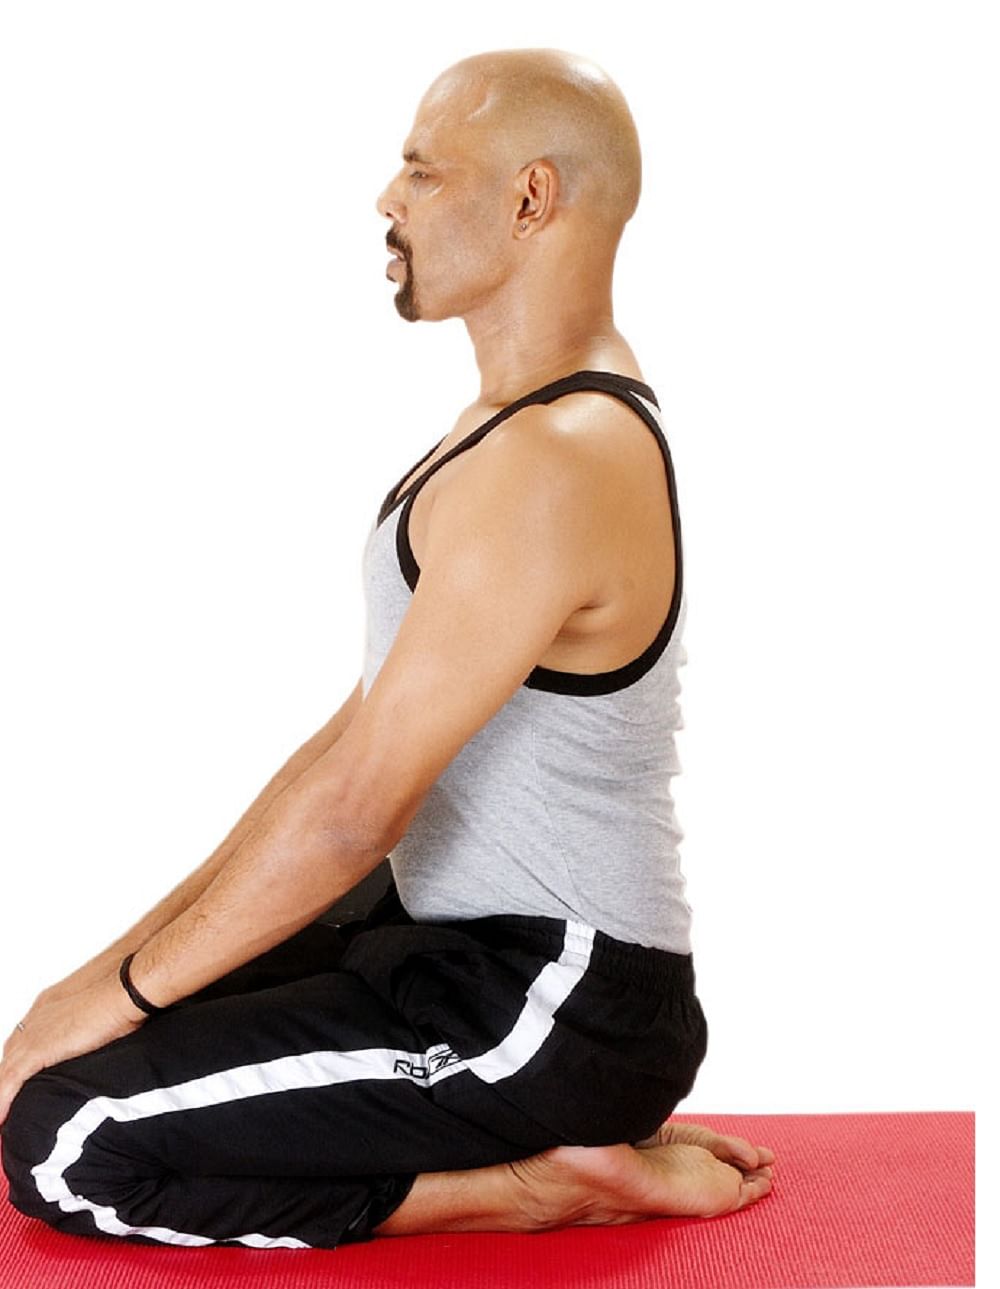 Joints Pain healers - For more about back pain yoga in hindi -  https://bit.ly/3awDDM7 | Facebook